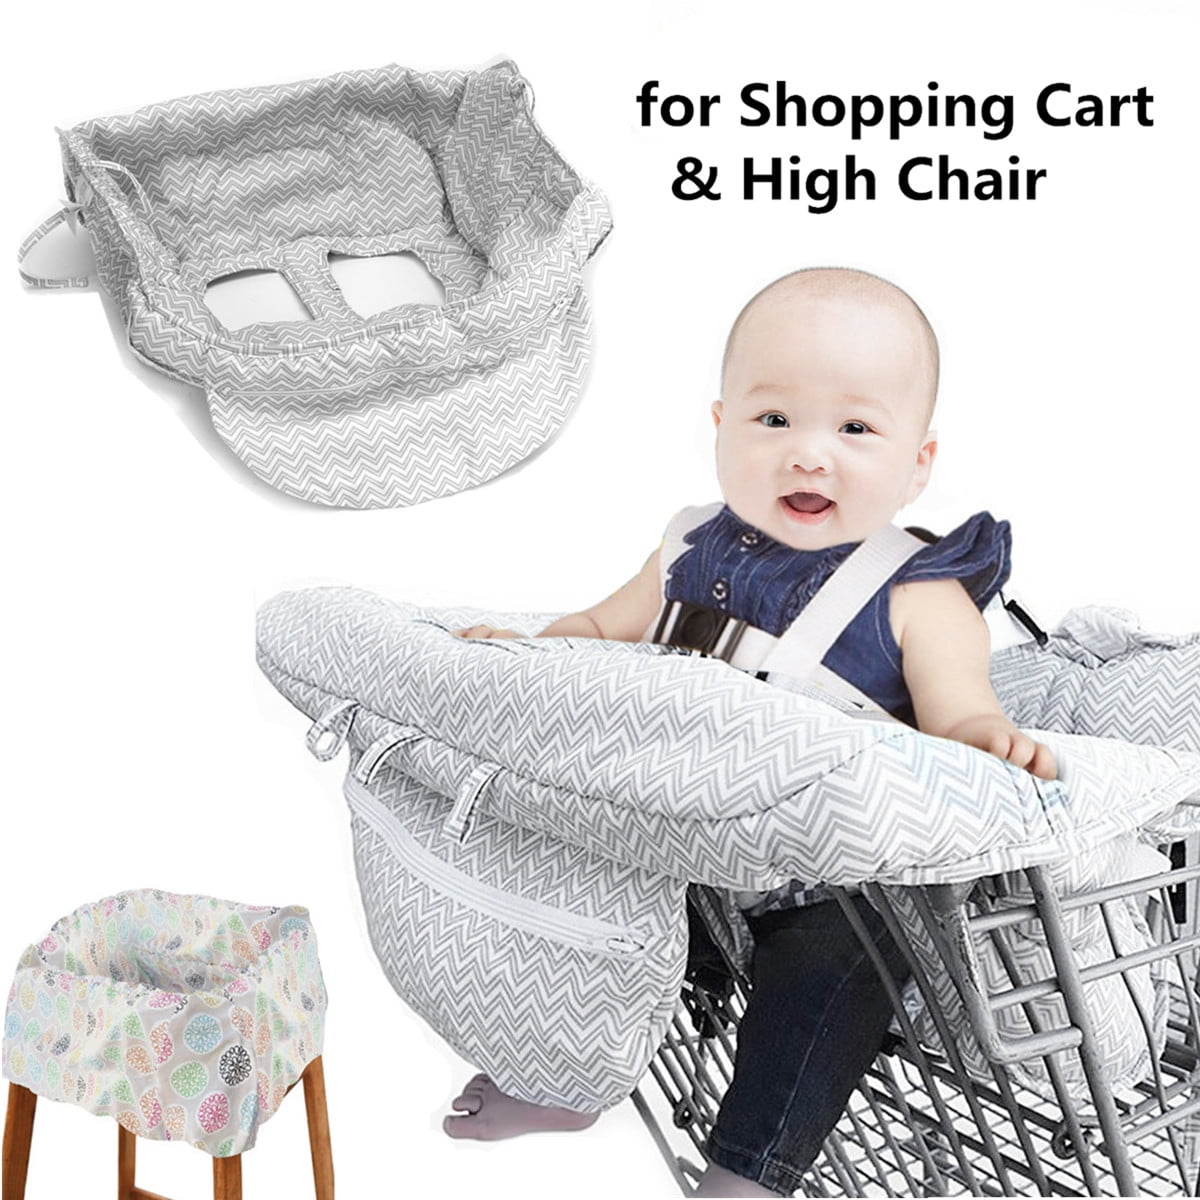 Baby Shopping Supermarket Trolley Cart Seat  Child High Chair Cover Protecor GT 